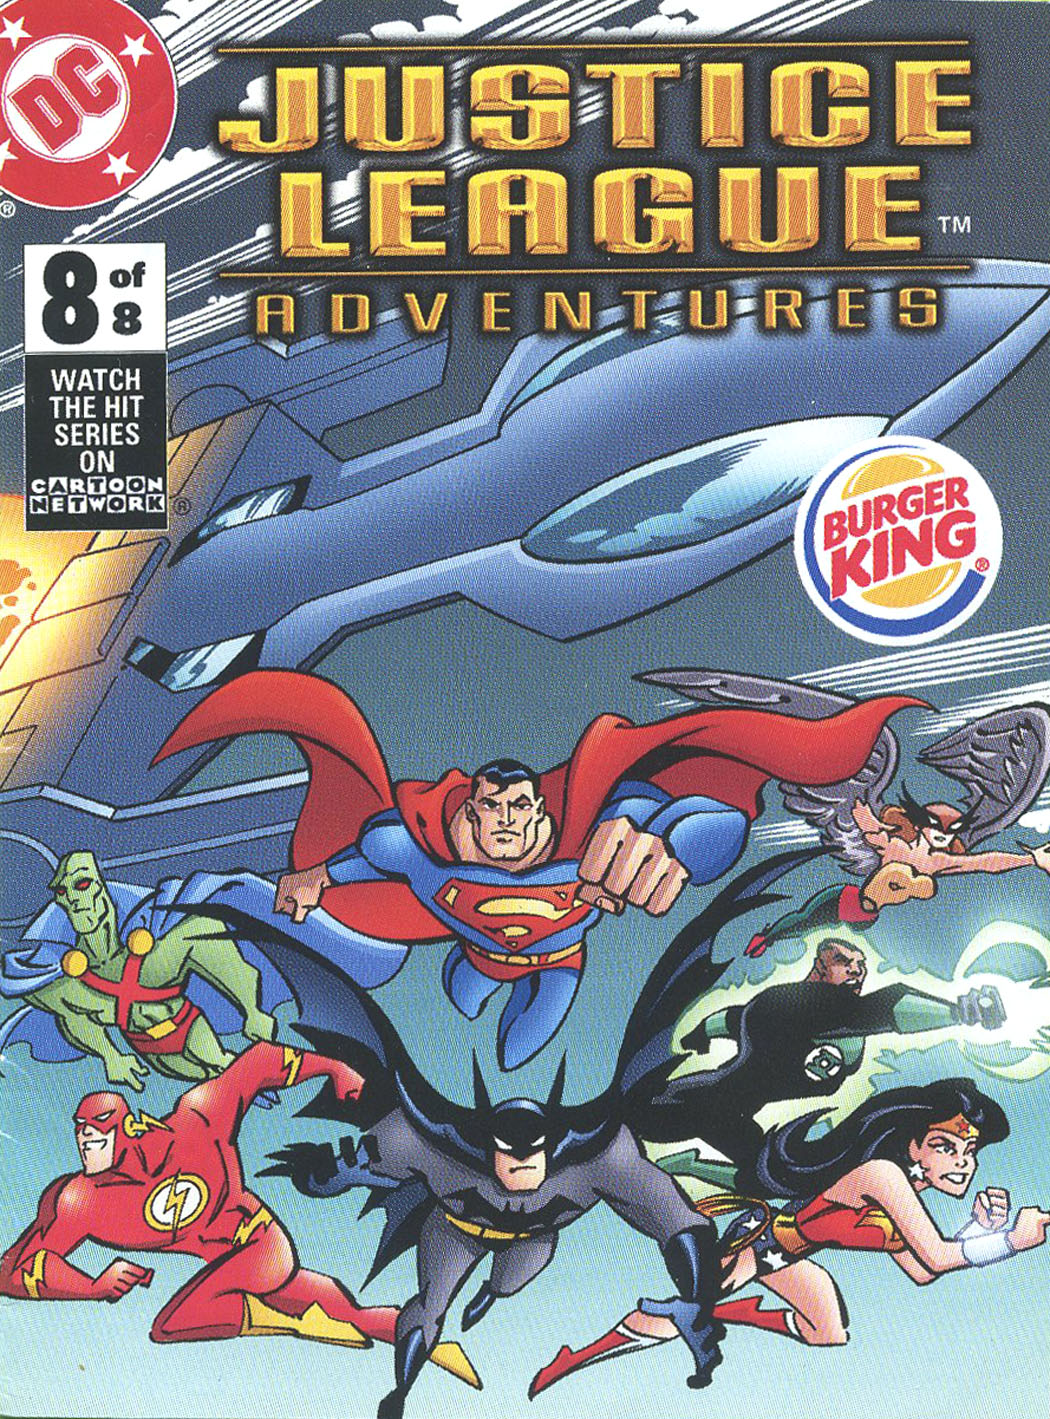 Justice League Adventures [Burger King Giveaway] issue 8 - Page 1